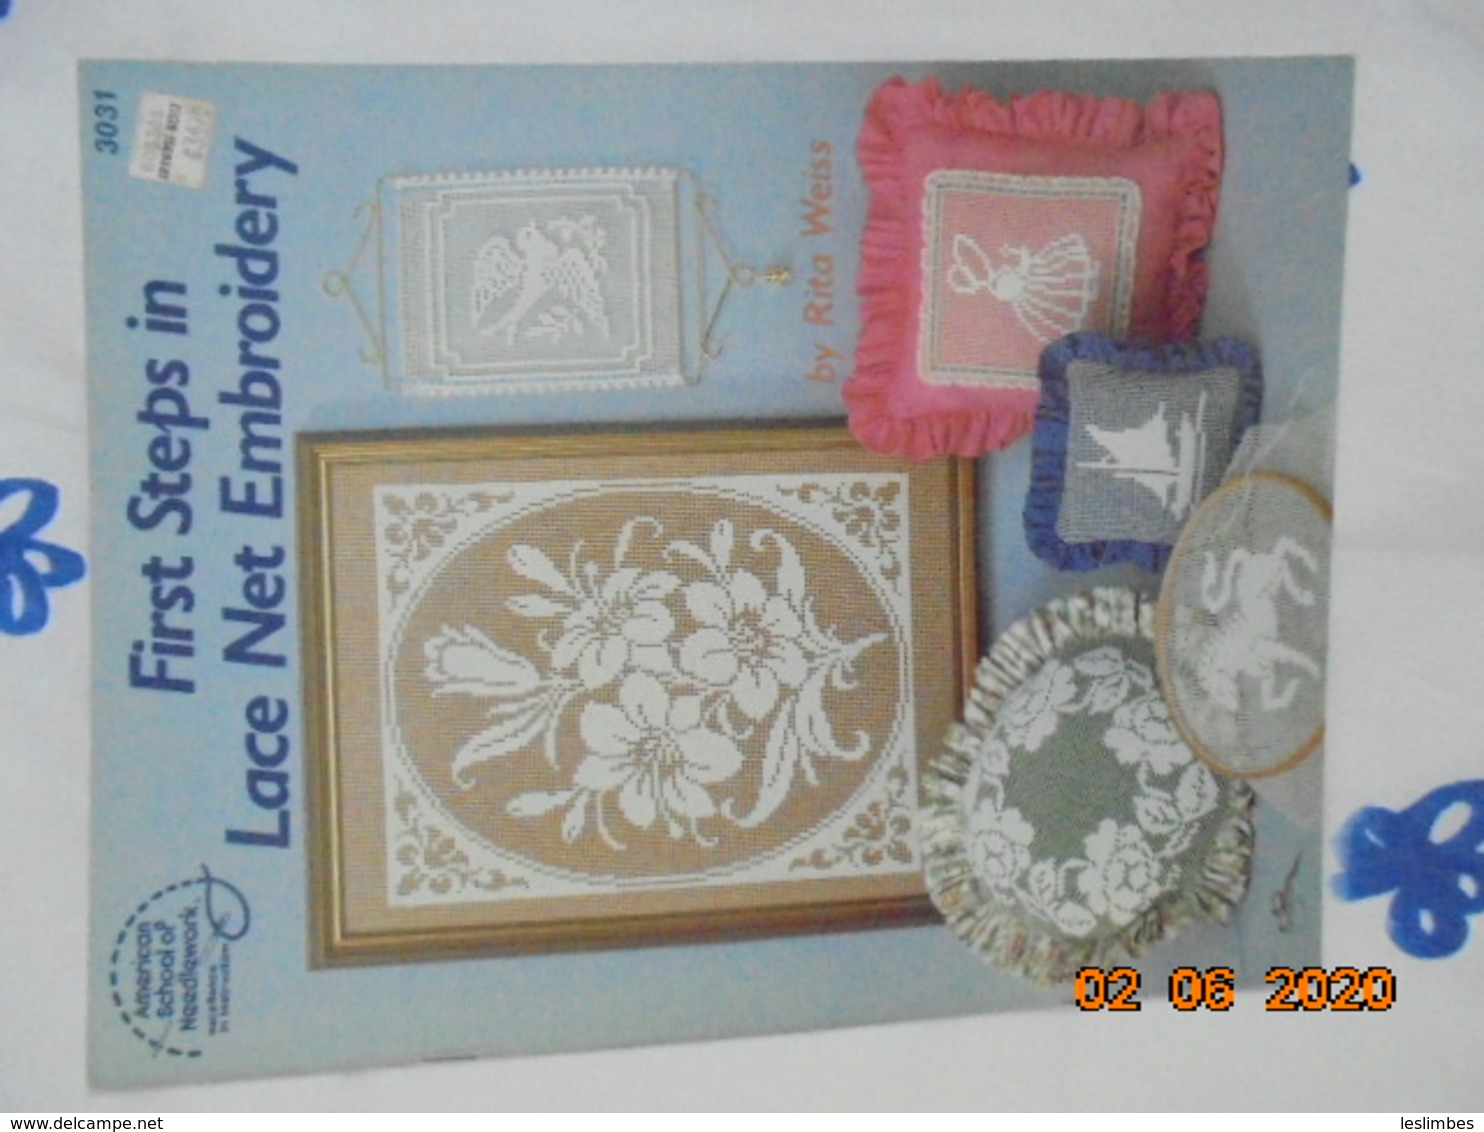 First Steps In Lace Net Embroidery By Rita Weiss ISBN 0881950815 American School Of Needlework 1984 - Bastelspass